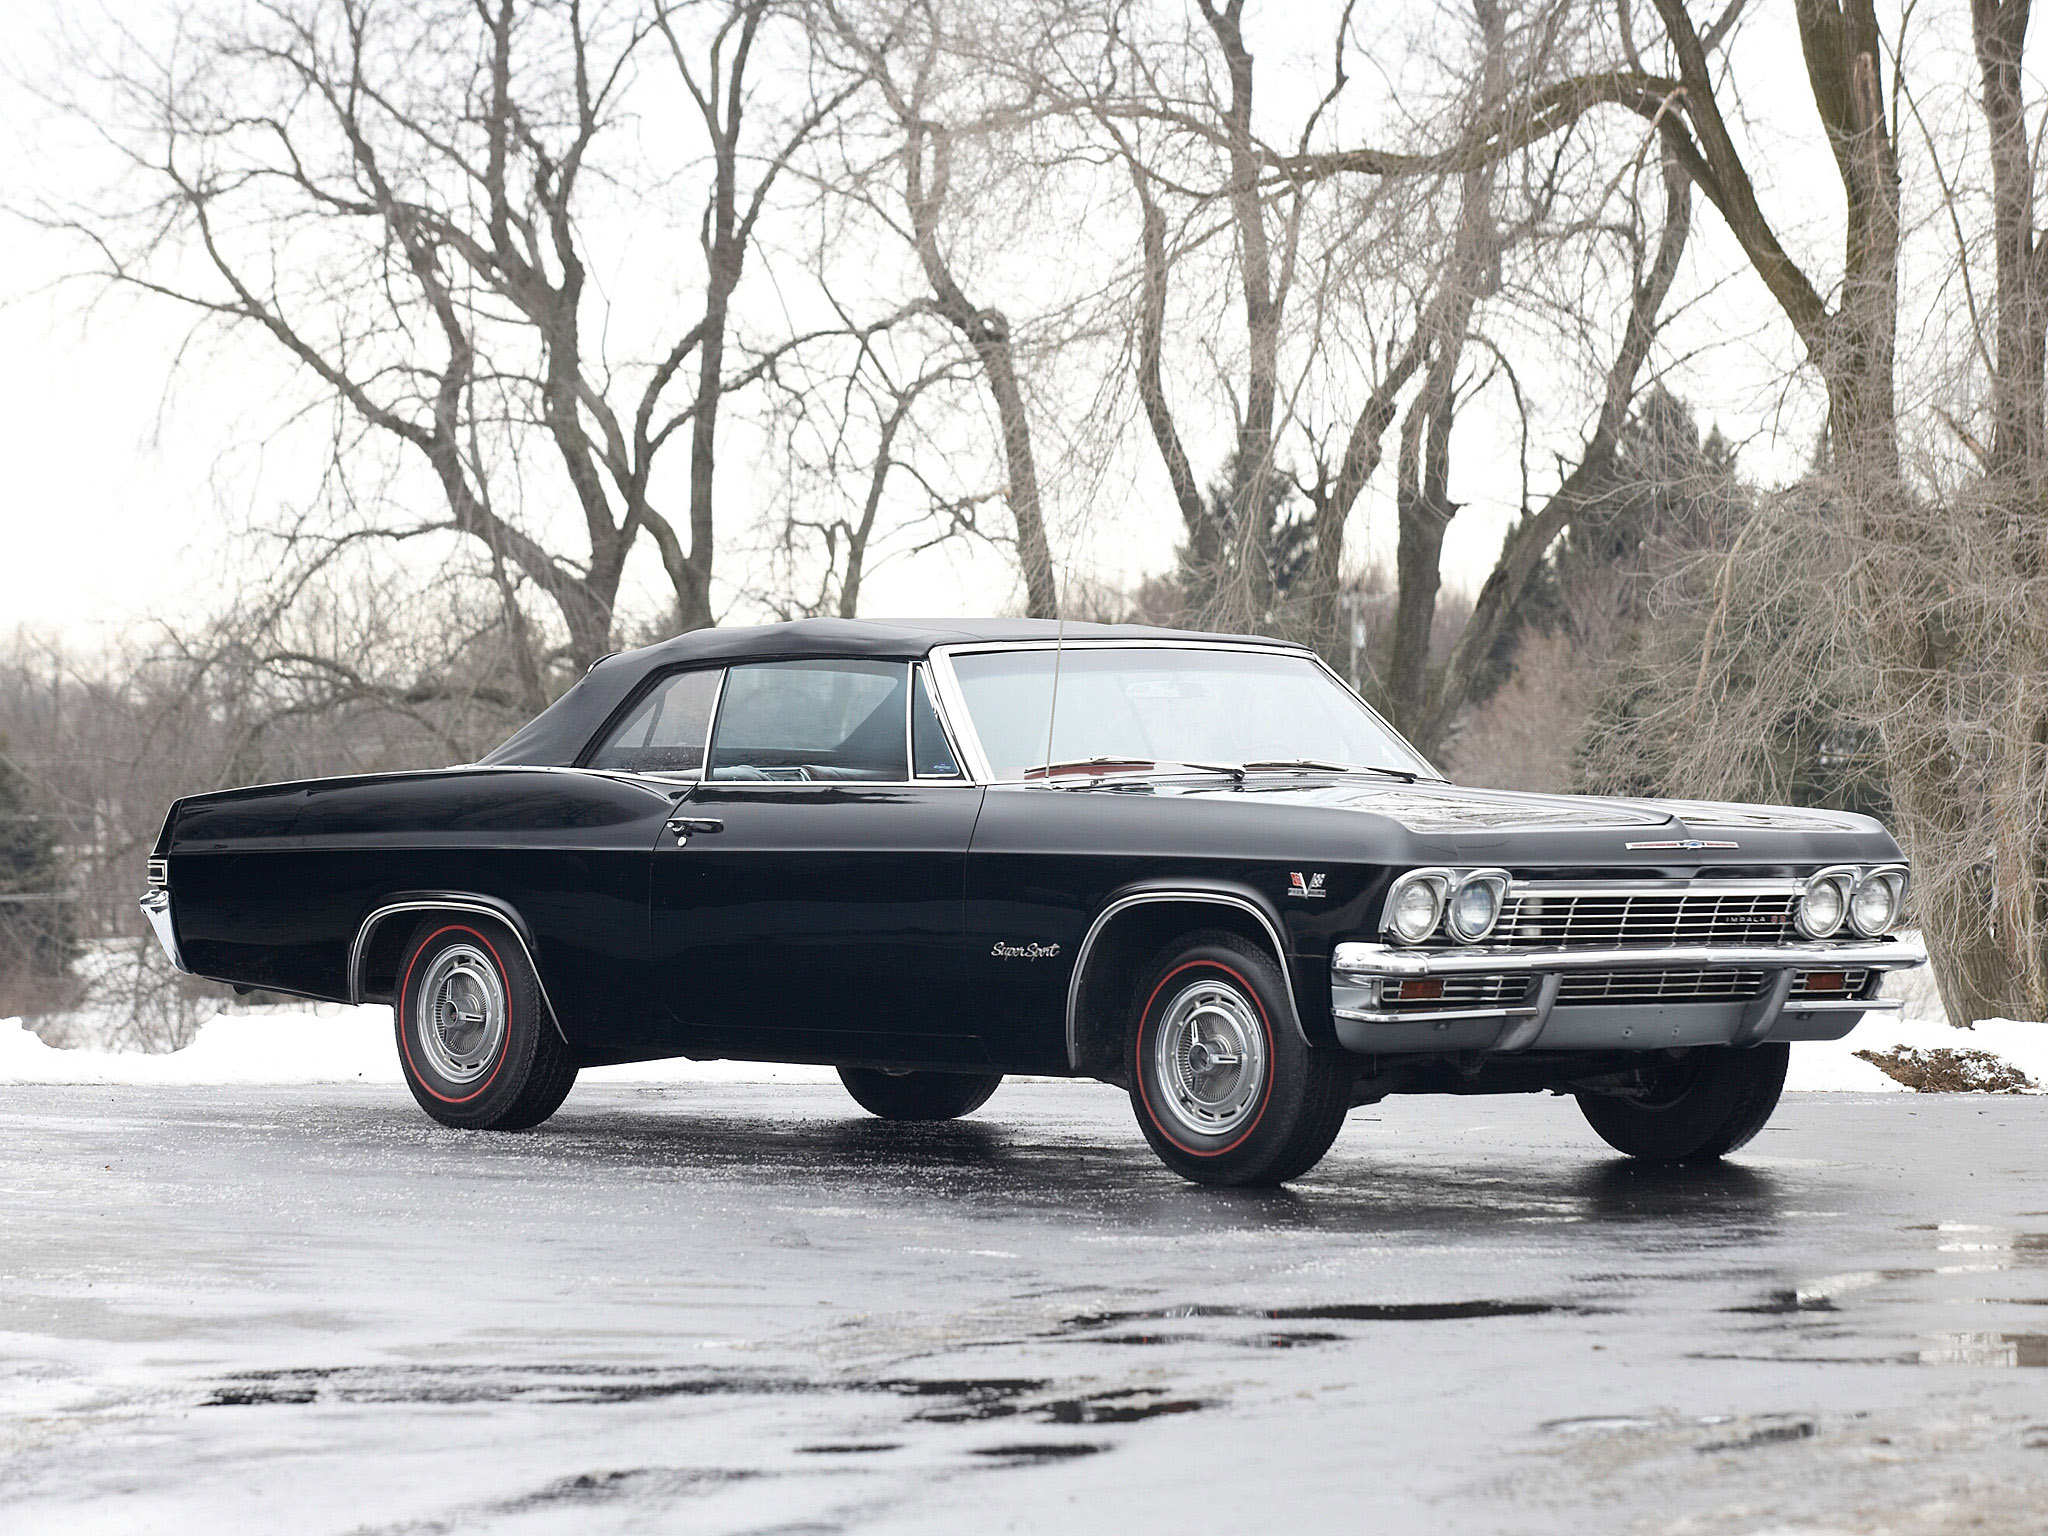 1965, Chevrolet, Impala, S s, Convertible, Muscle, Classic Wallpaper